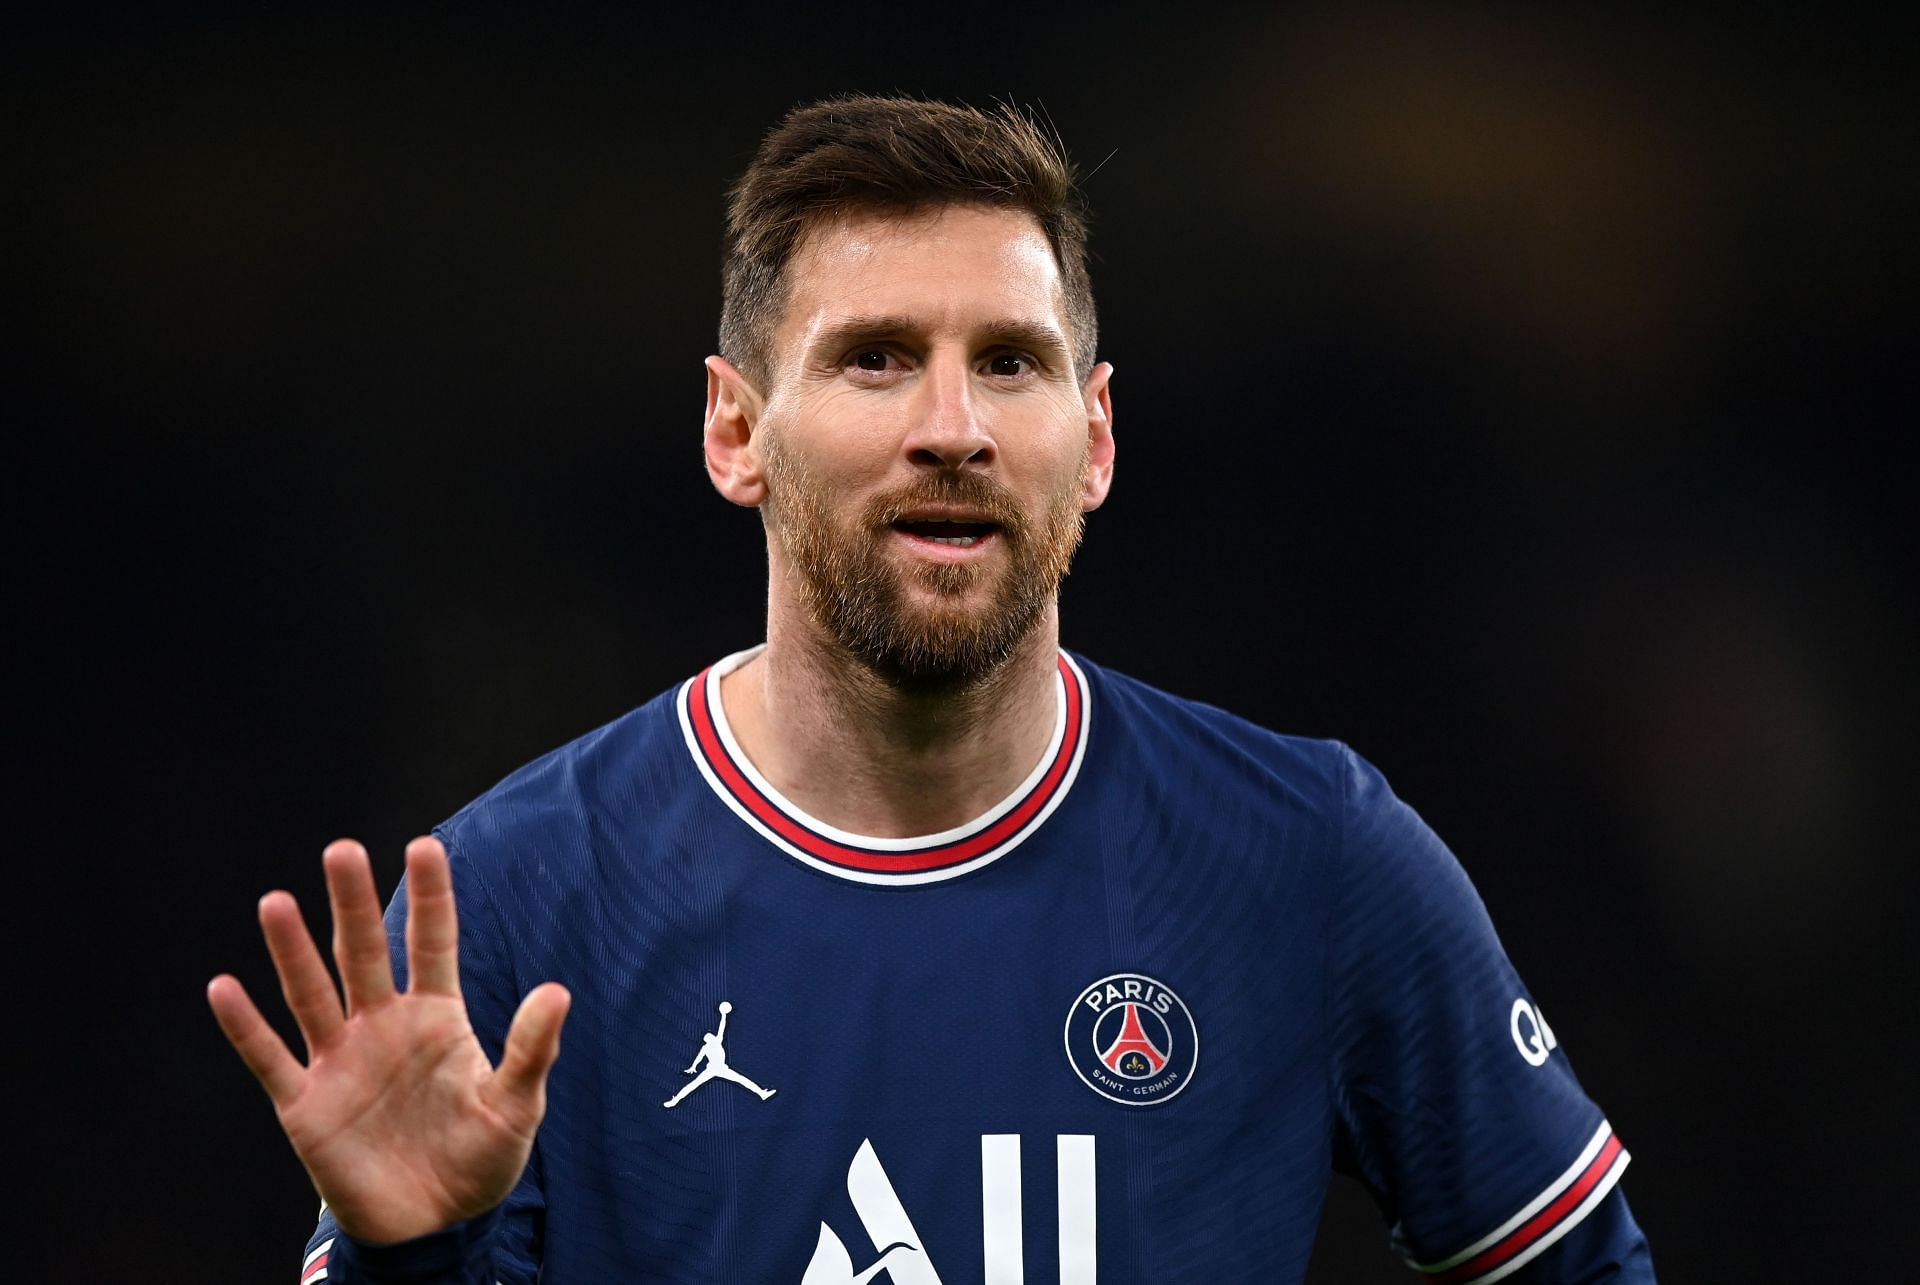 Mauricio Pochettino has hinted that Lionel Messi could be handed a start against Nice.